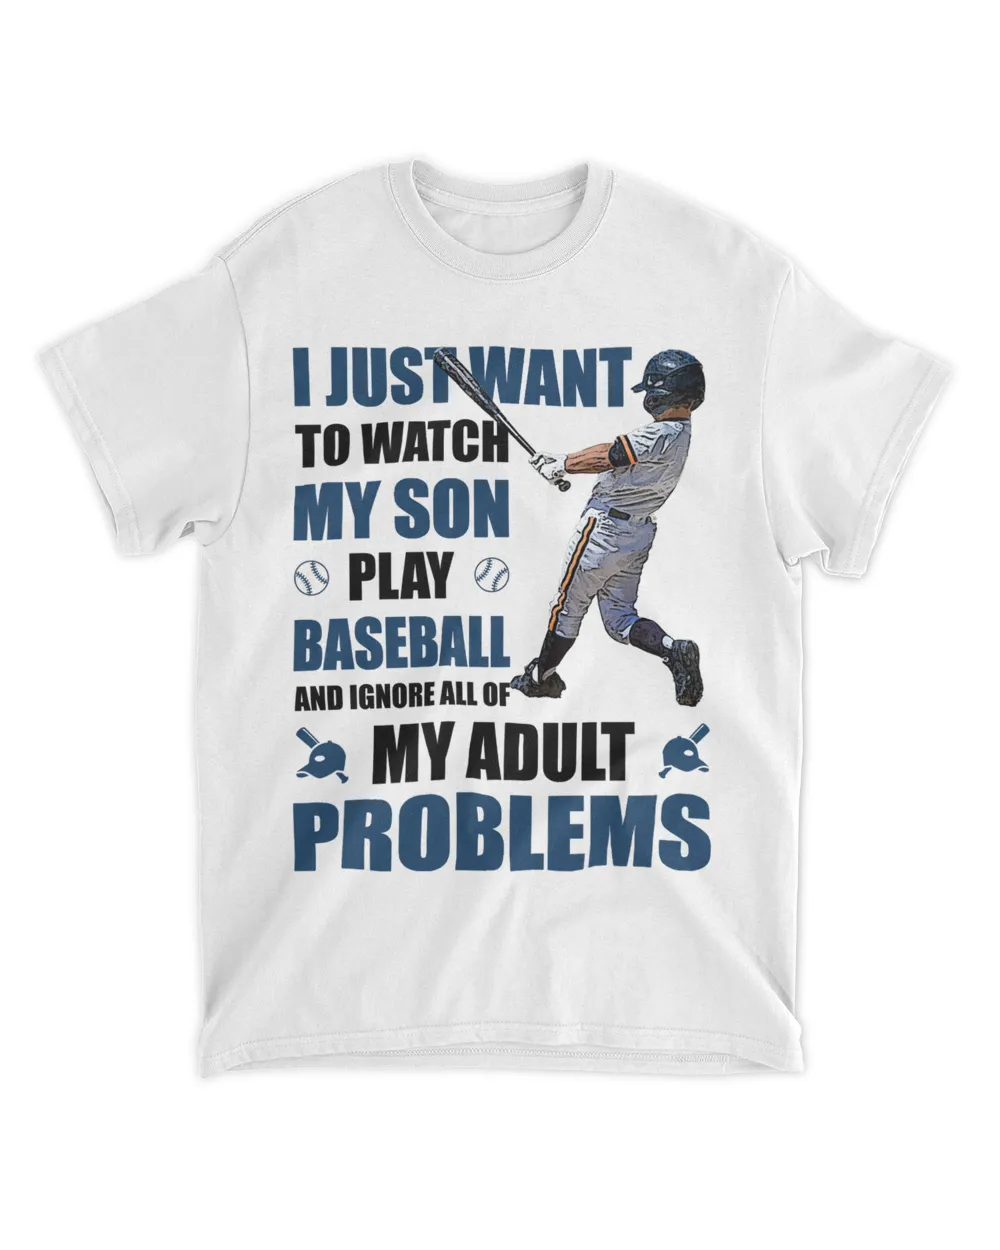 Baseball Ignore All Of My Adult Problems